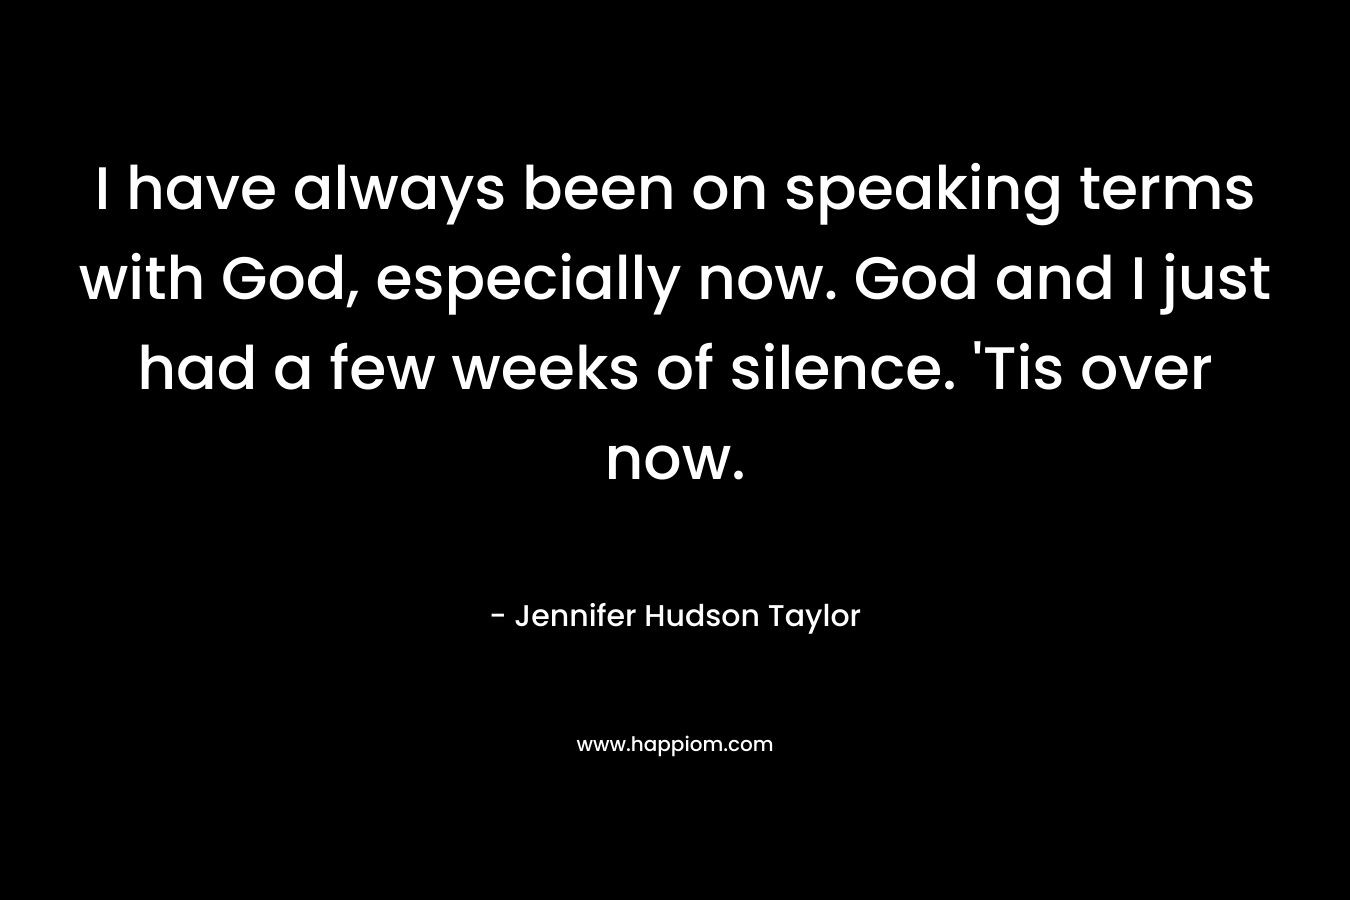 I have always been on speaking terms with God, especially now. God and I just had a few weeks of silence. 'Tis over now.